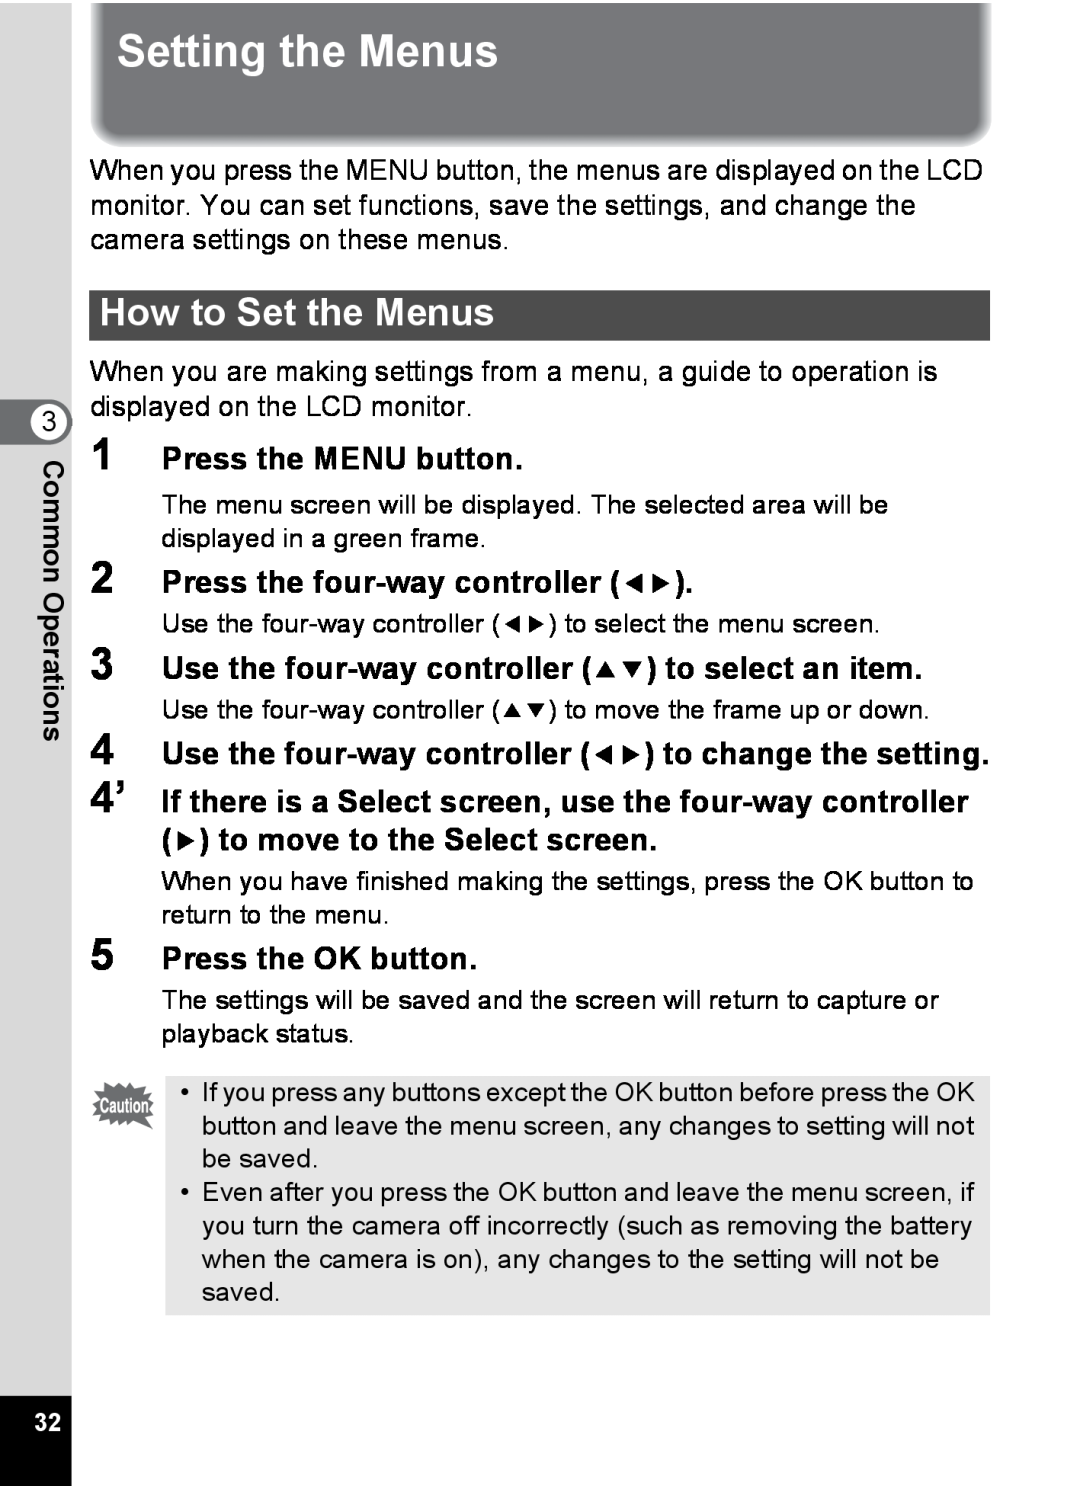 Pentax S4 Setting the Menus, How to Set the Menus, Press the MENU button, Use the four-way controller 23 to select an item 